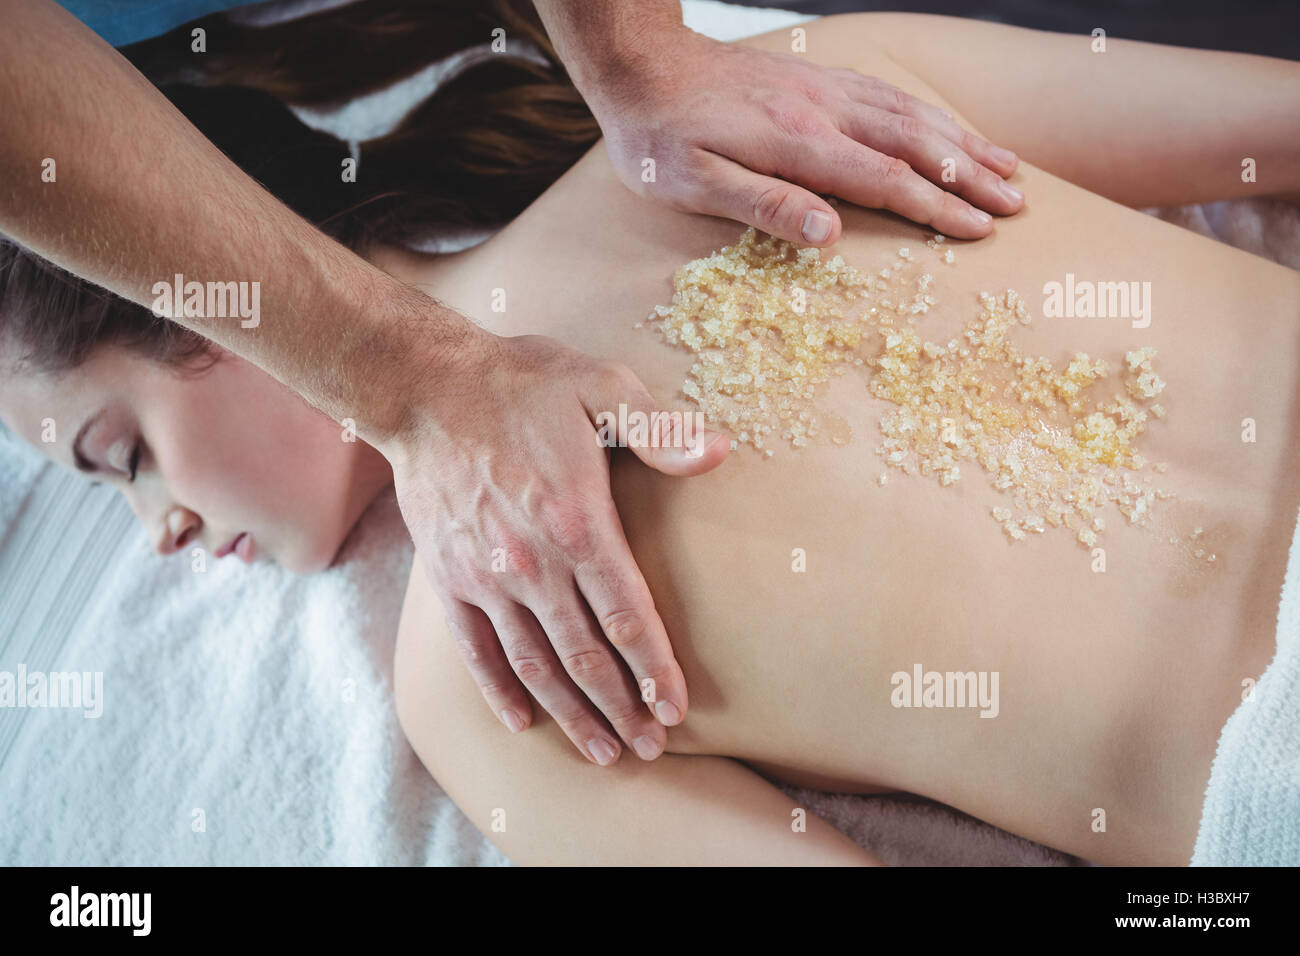 Physiotherapist applying salt scrub on the back of a female patient Stock Photo